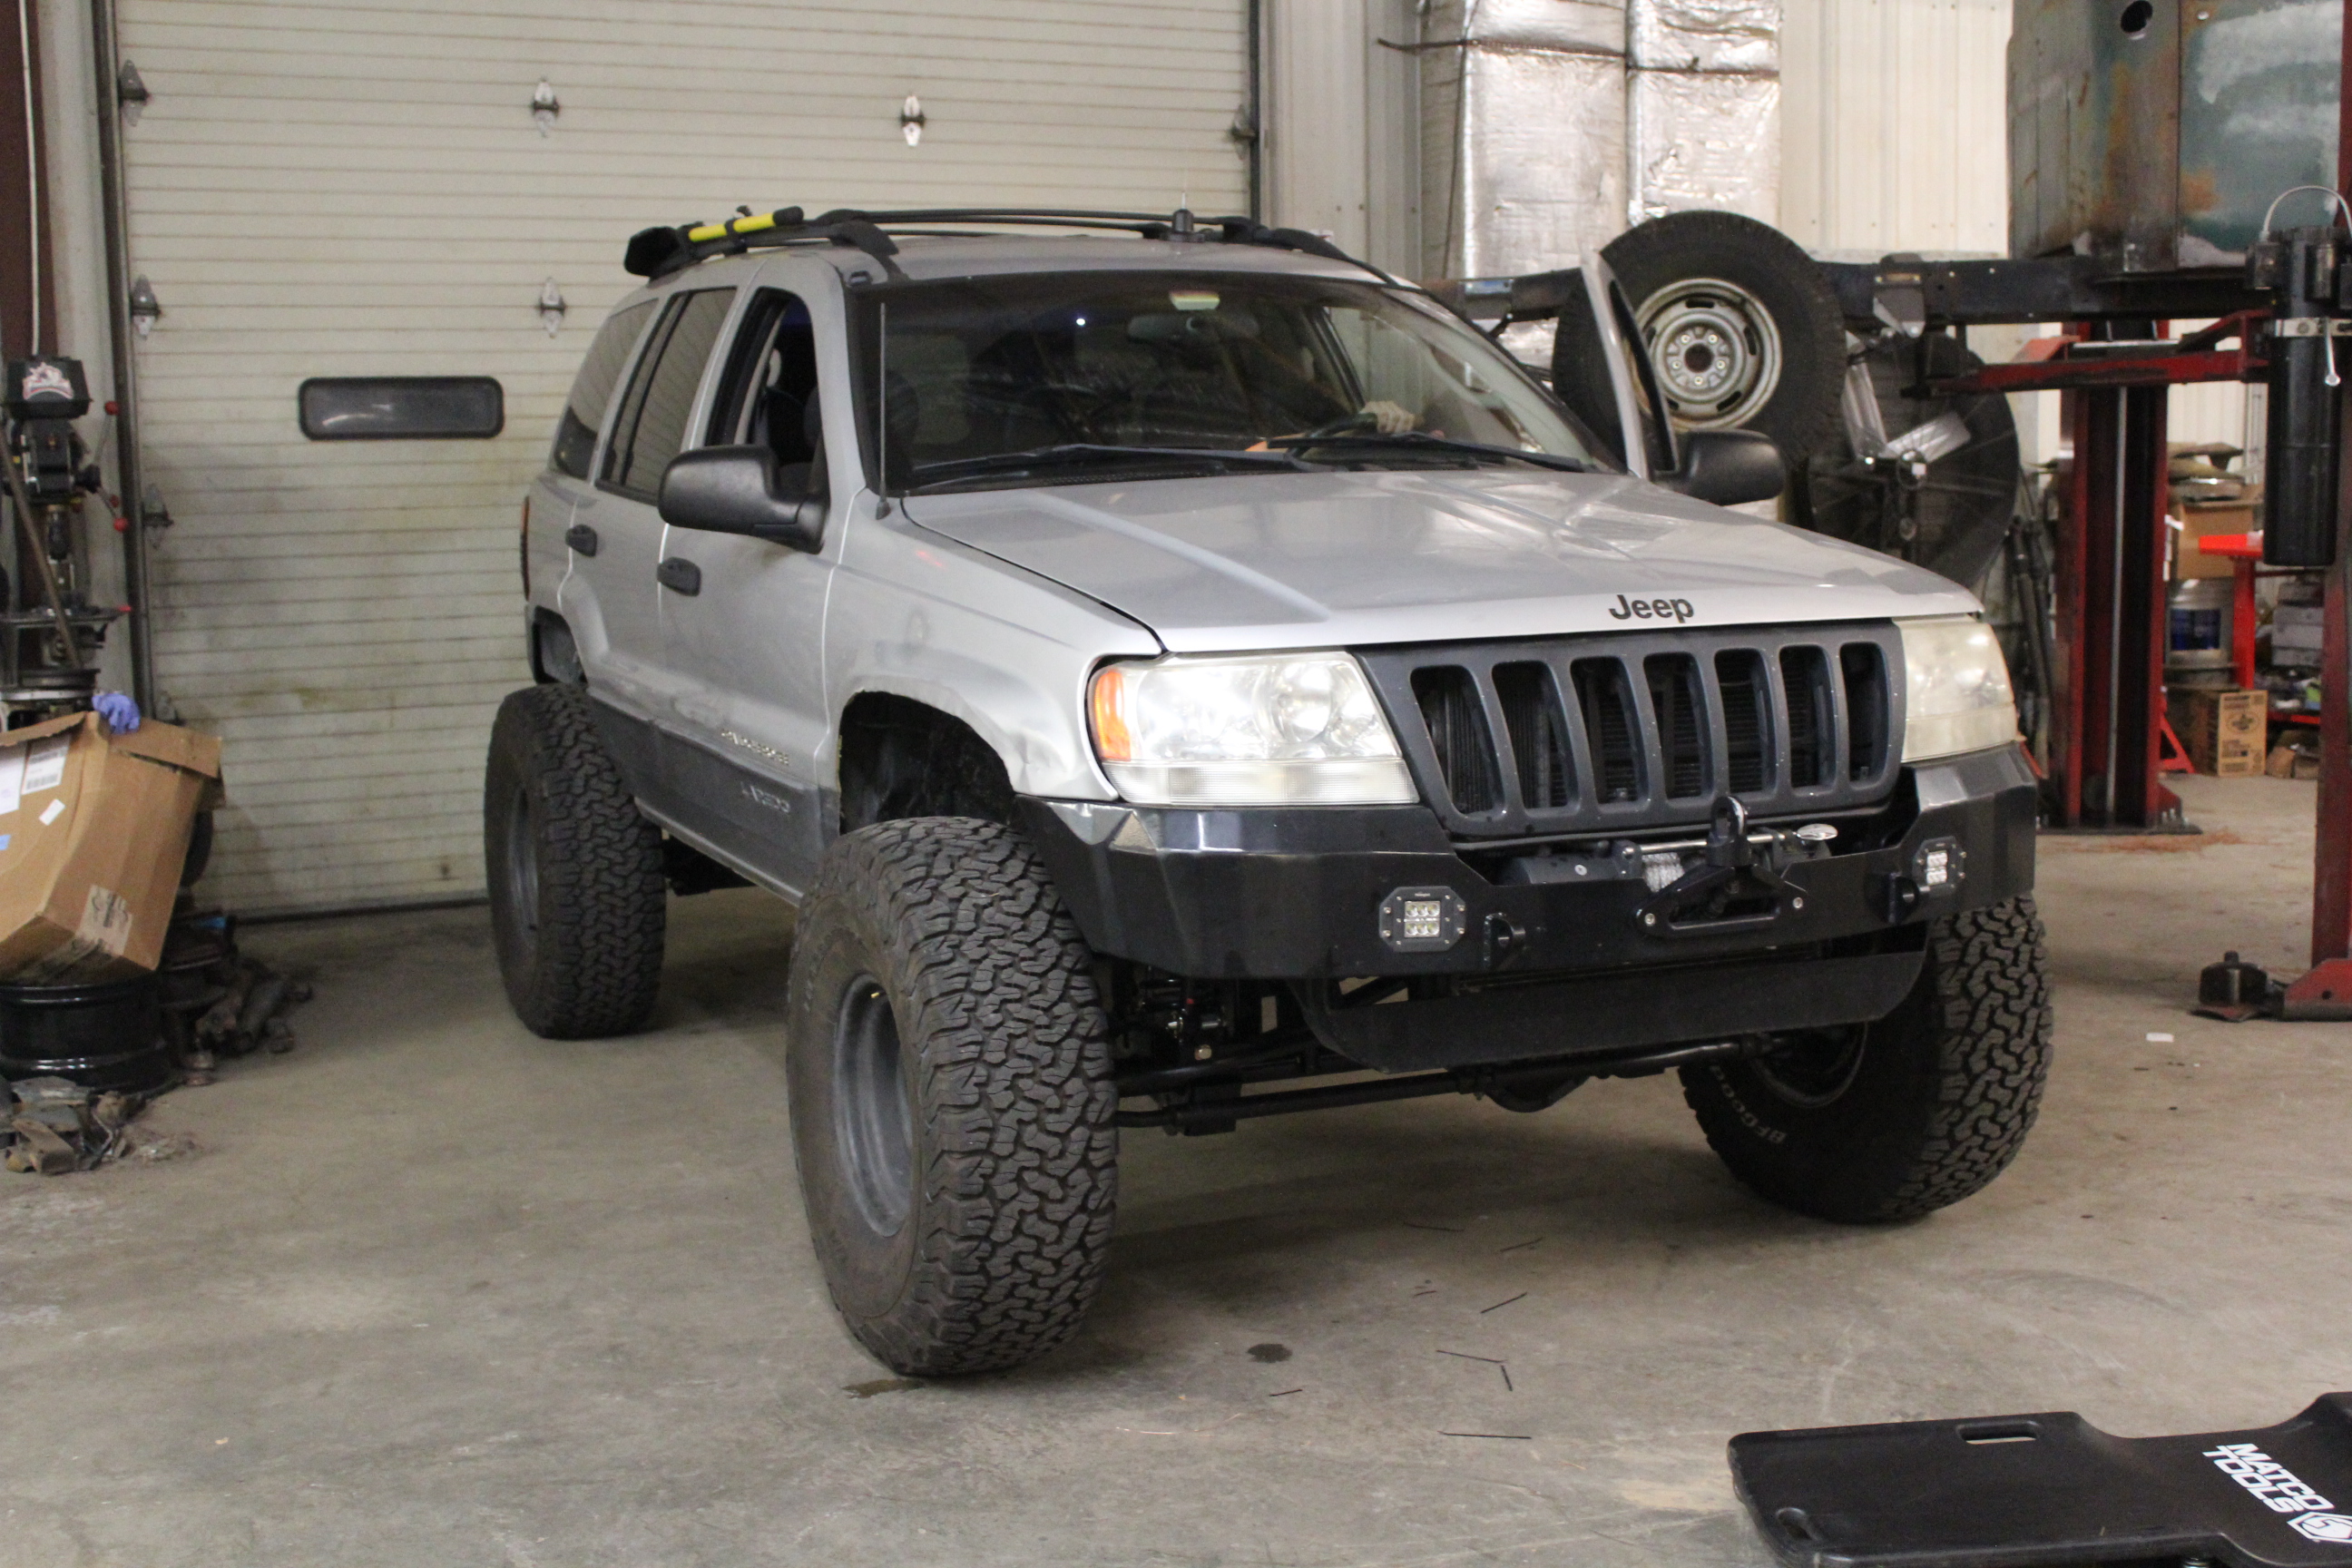 Military Mobility's 2002 Jeep Grand Cherokee build